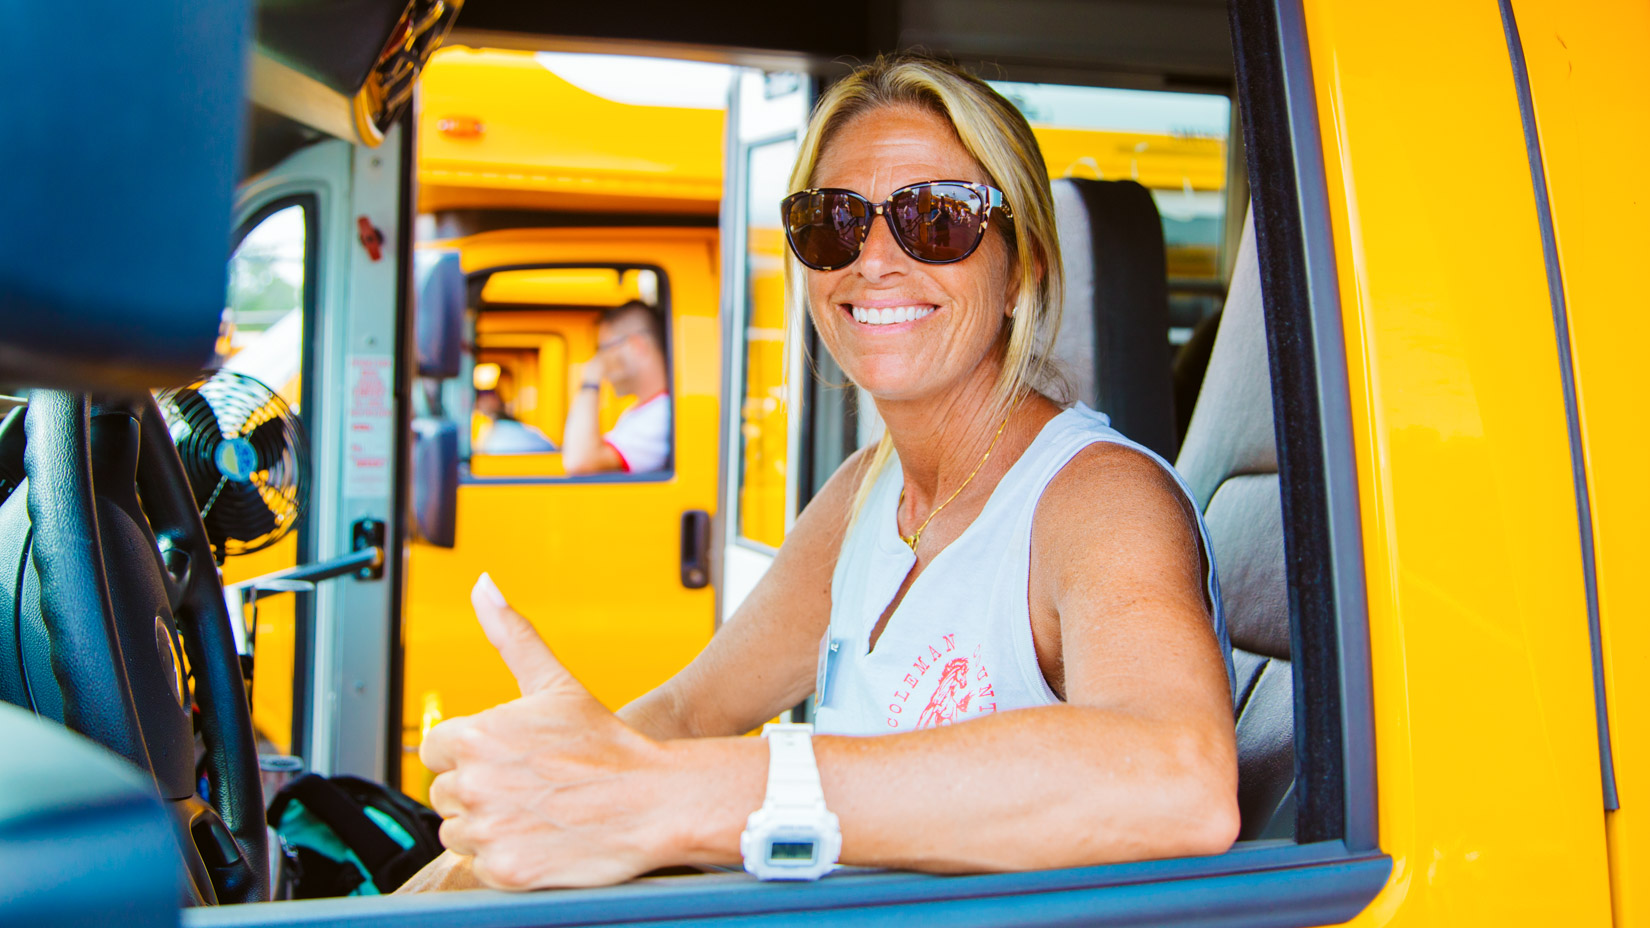 Camp bus driver gives thumbs up through window